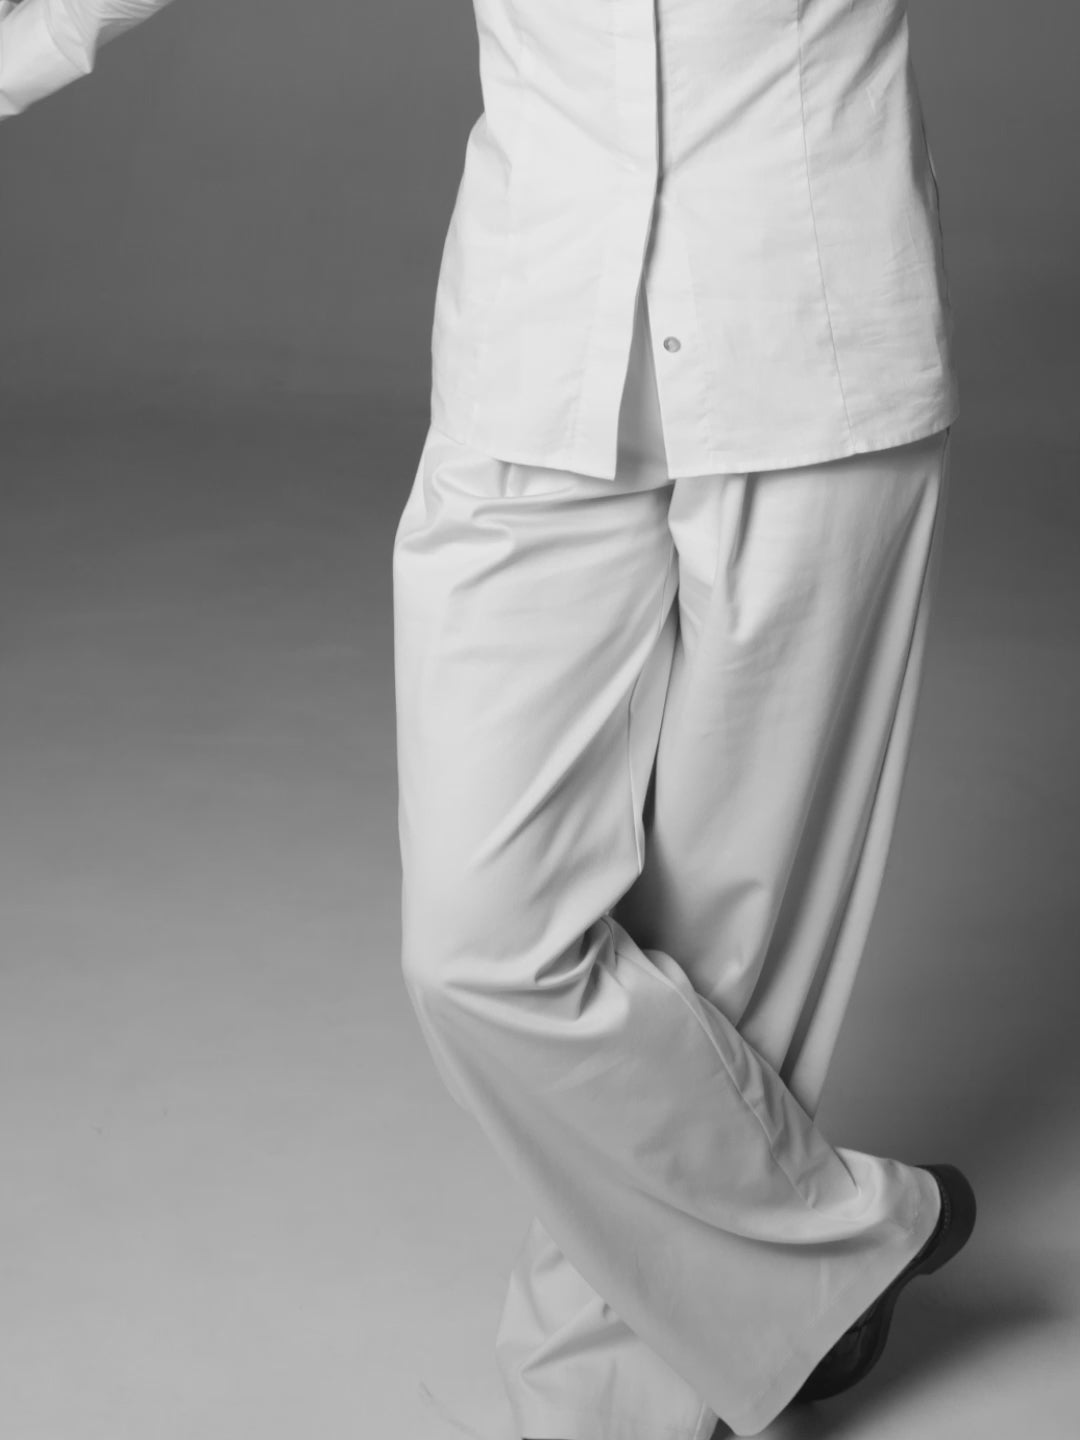 A model posing wearing a sustainable cotton shirt and pants in light beige color.